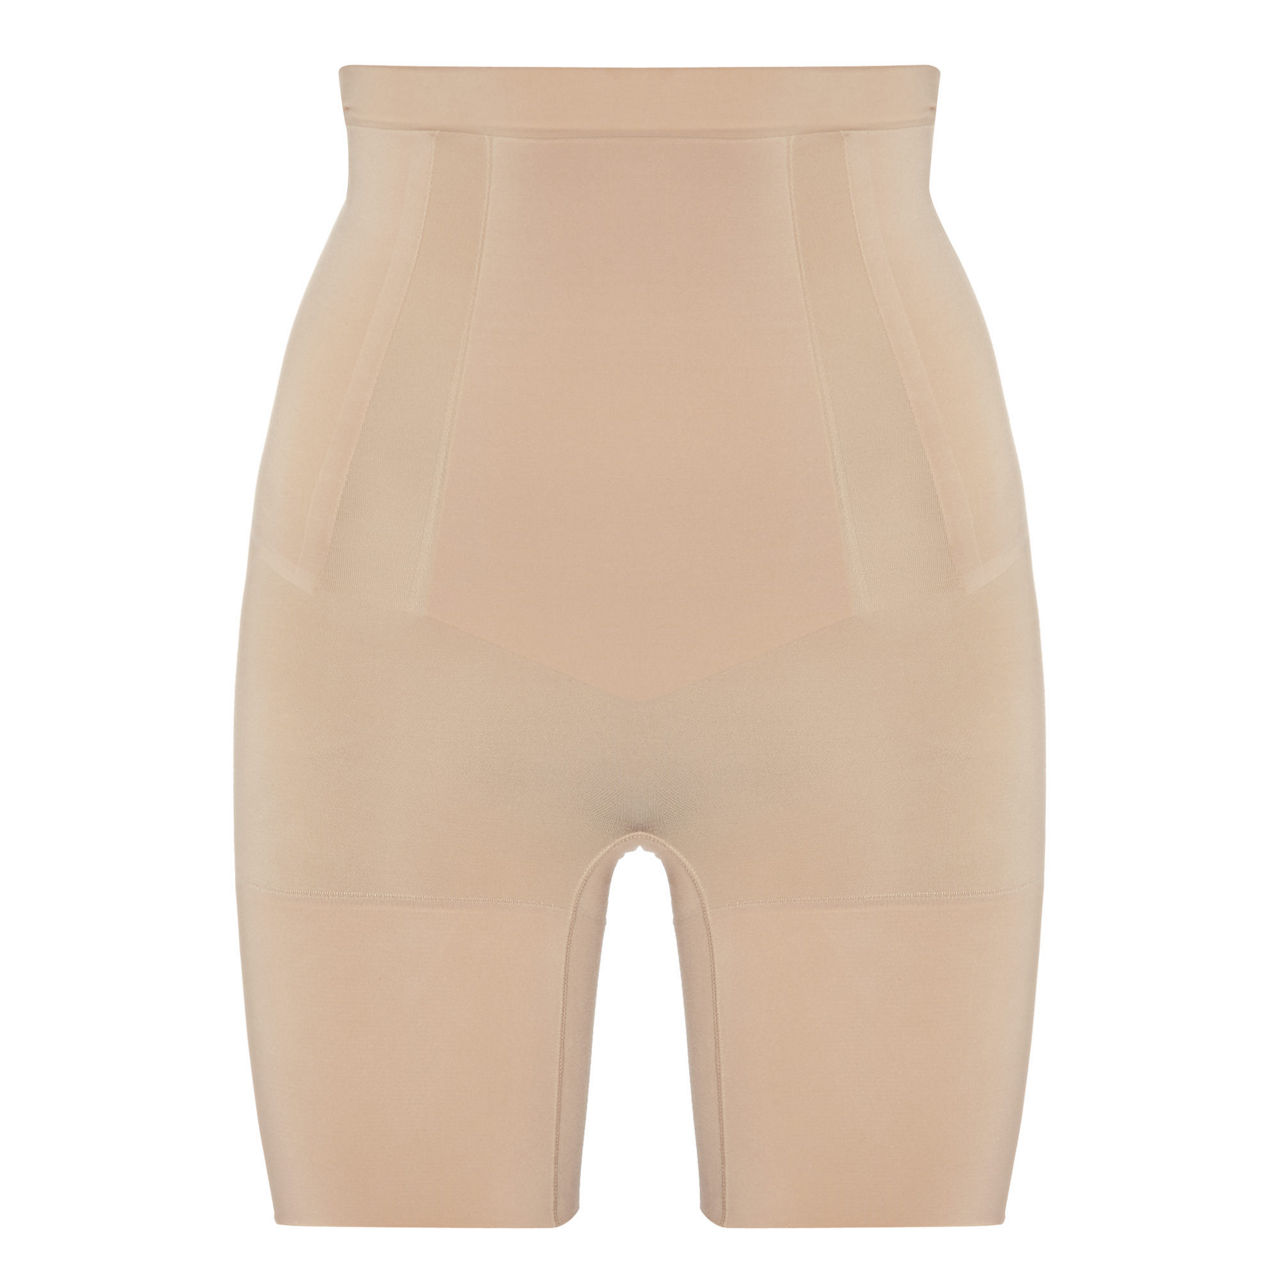 Buy Spanx OnCore High-Waisted Mid-Thigh Short Naked 3.0 XS at